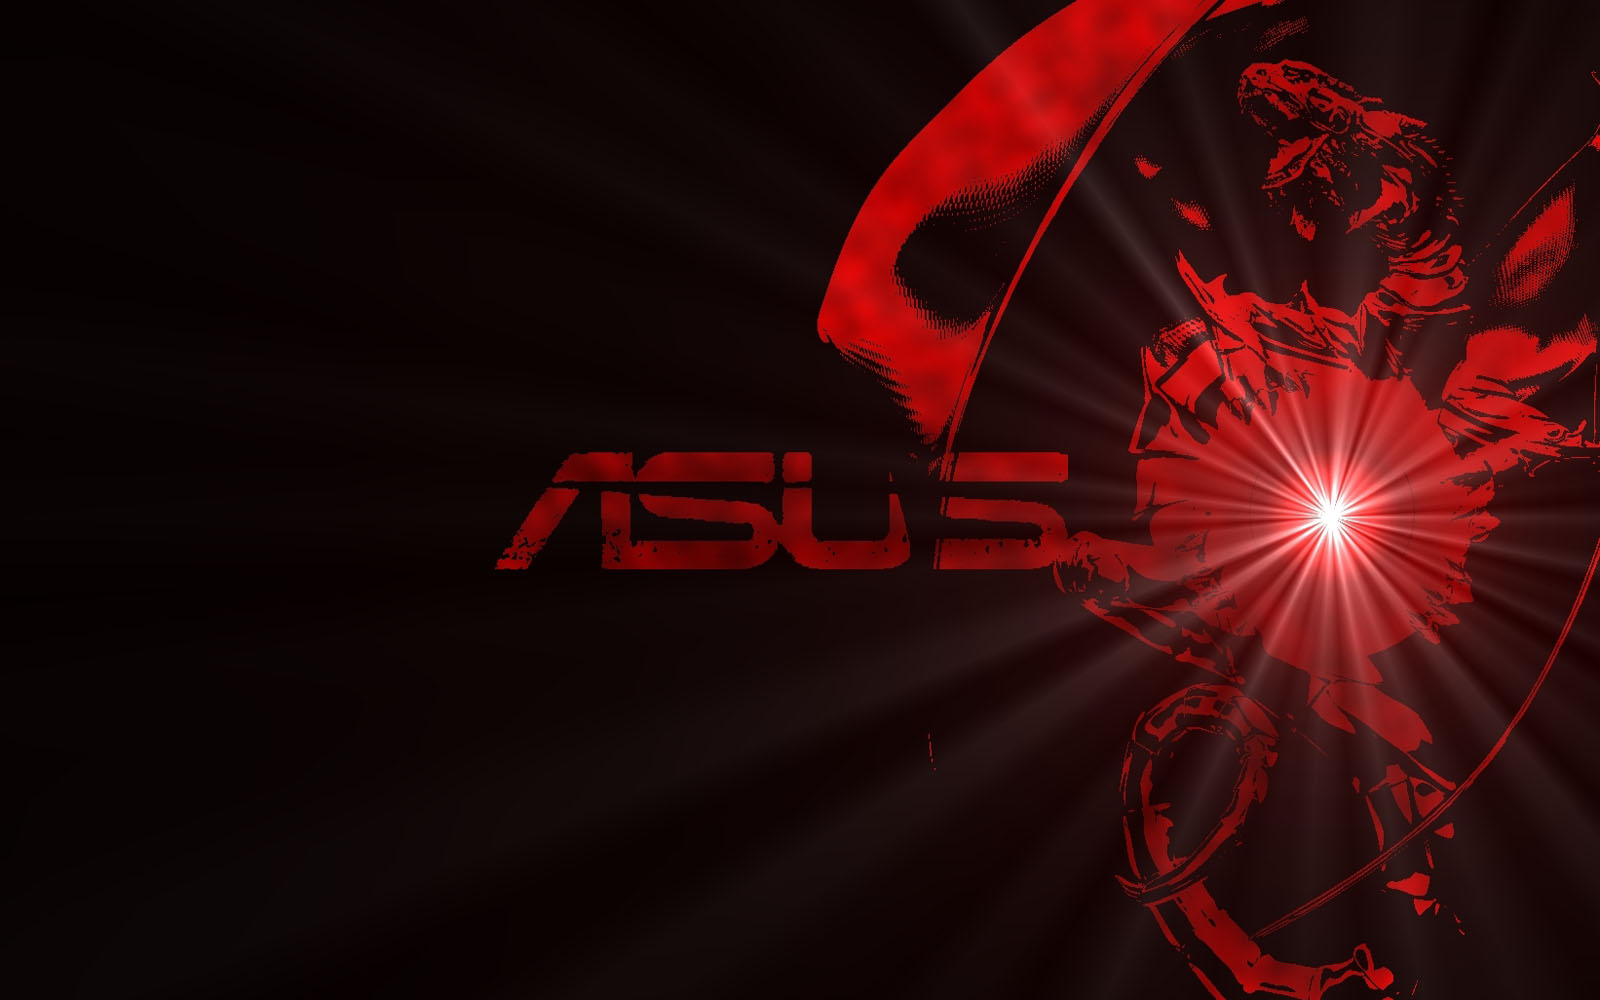 Tag Asus Wallpaper Background Photos Image And Pictures For